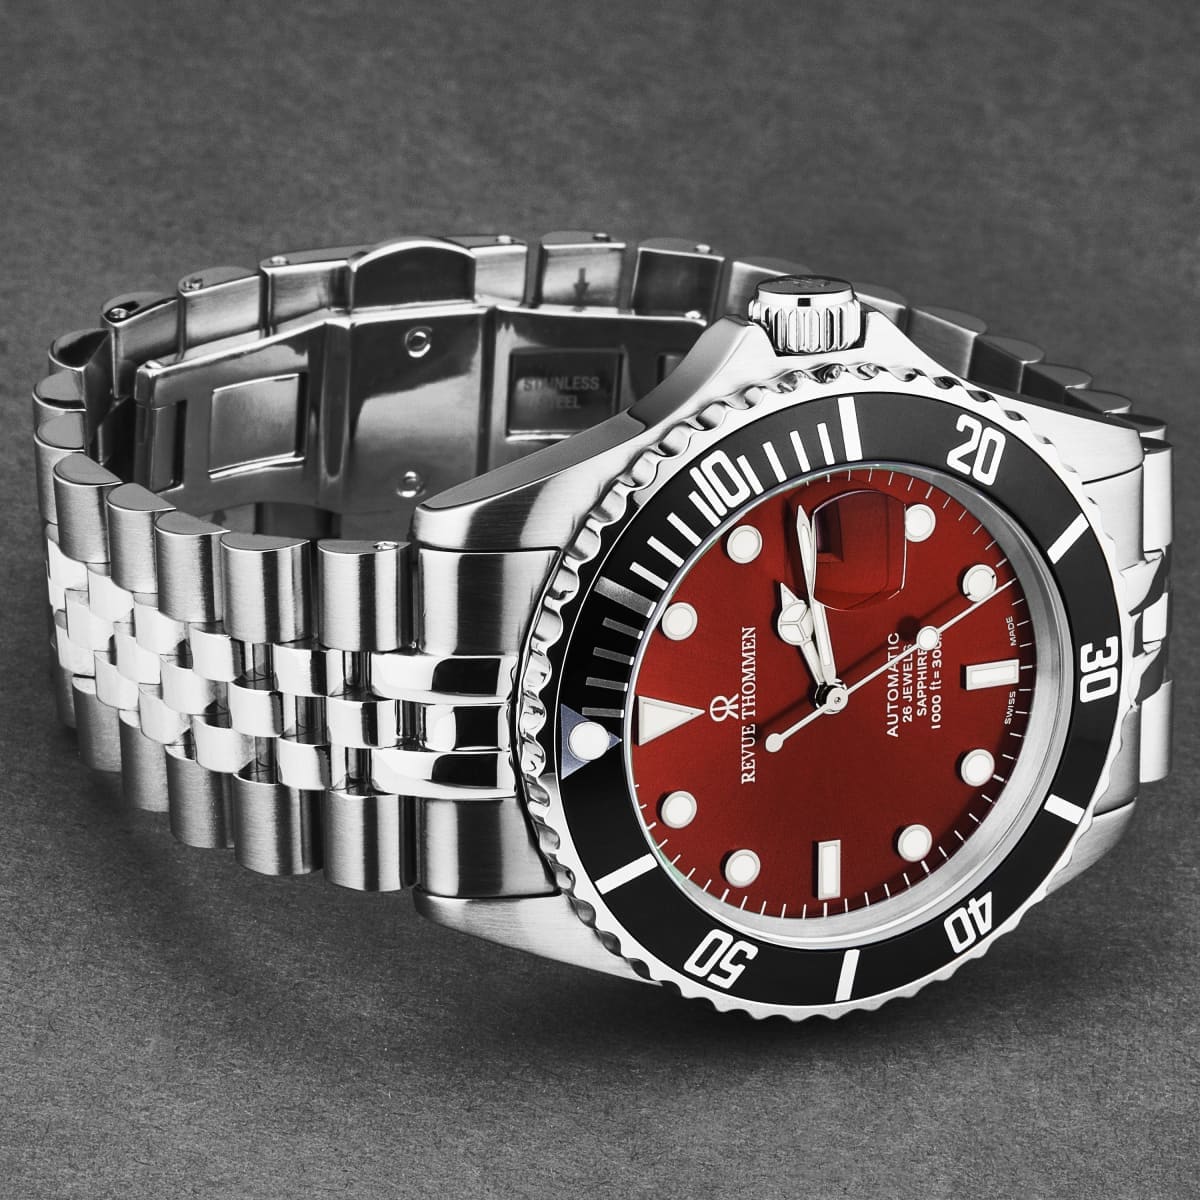 Revue Thommen Men’s ’Diver’ Red Dial Stainless Steel Bracelet Automatic Watch 17571.2238 - On sale